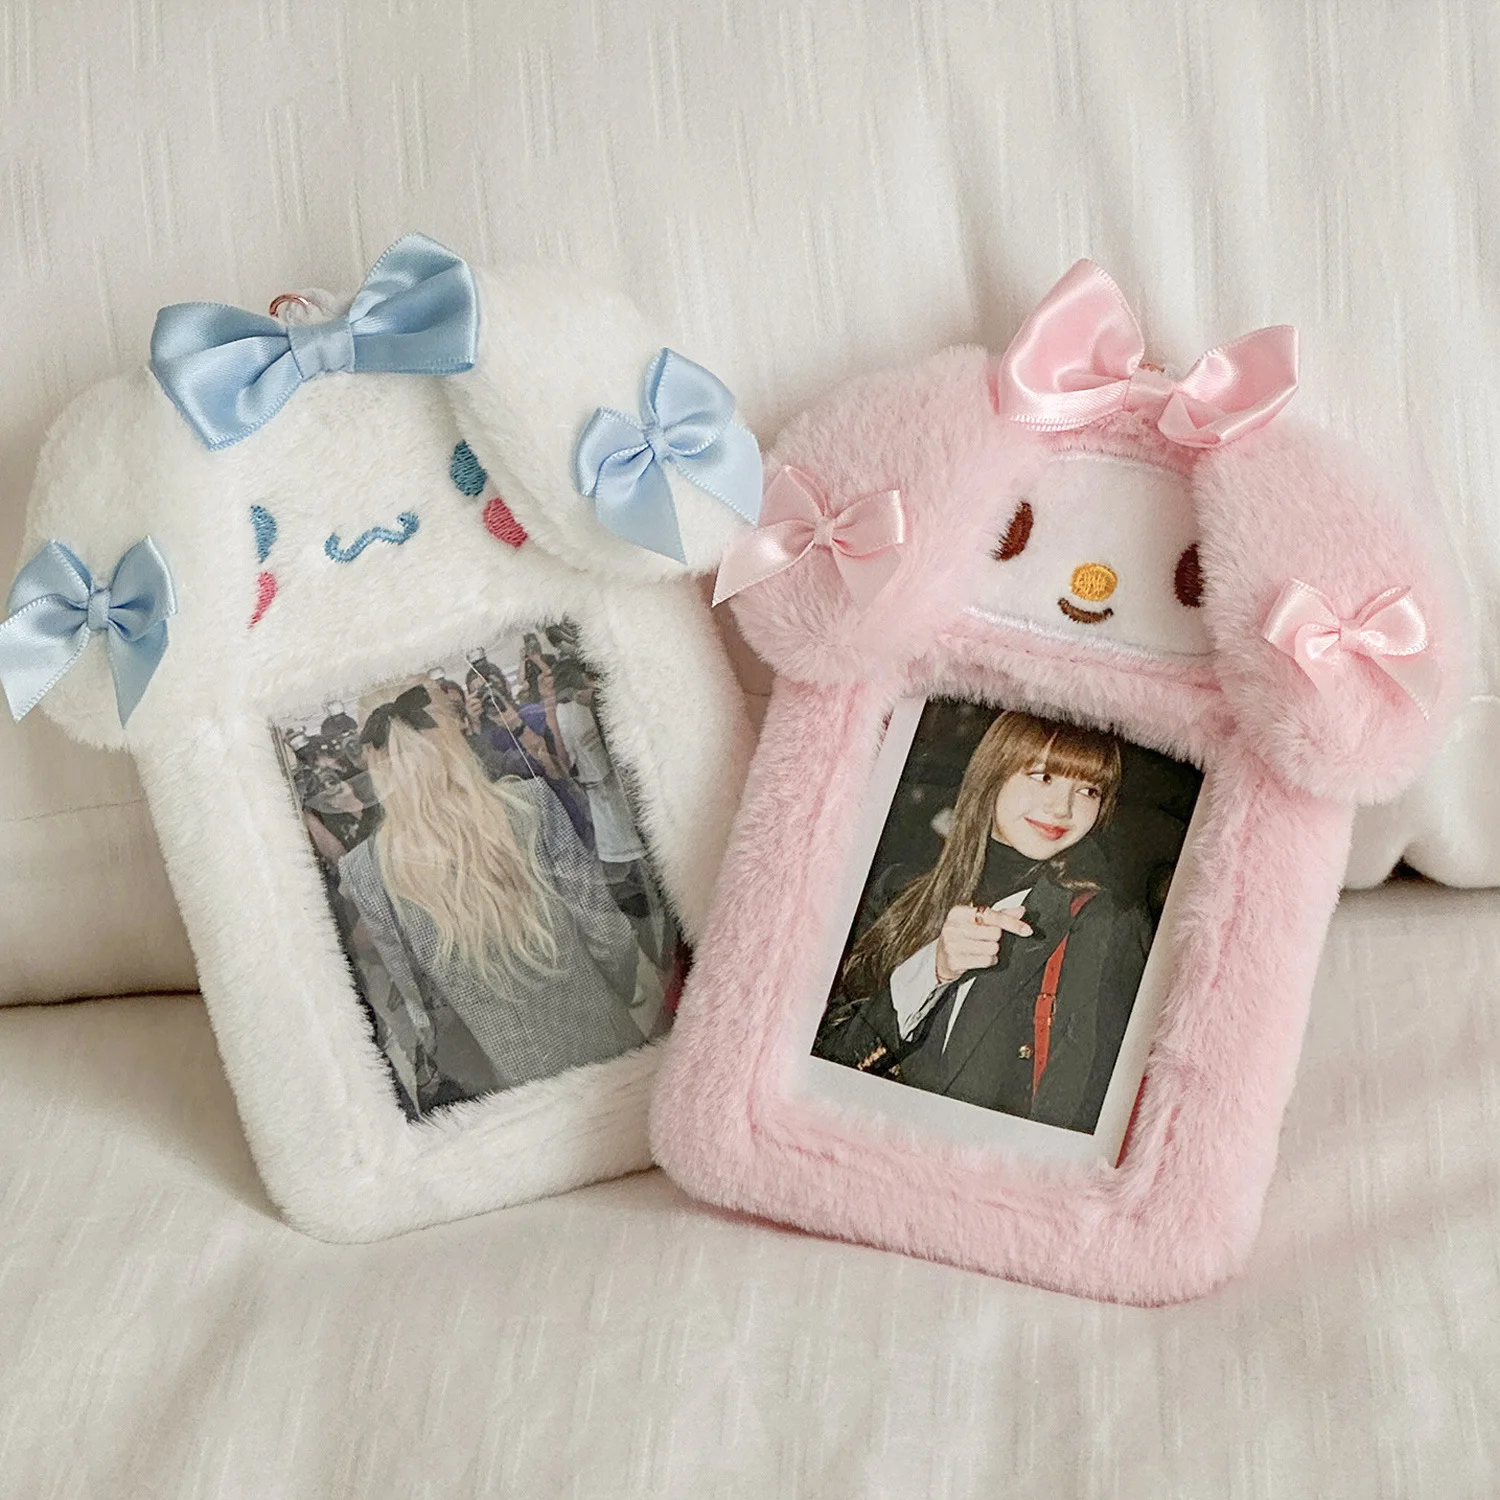 Sanrio Plush Card Holder Cute Cartoon My Melody Cinnamoroll Student Id Card Access Card Bus Card Protective Cover Pendant Gift checkerboard a5 kpop idol photocard binder hard cover loose leaf photo card holder 6 hole book jacket collection book